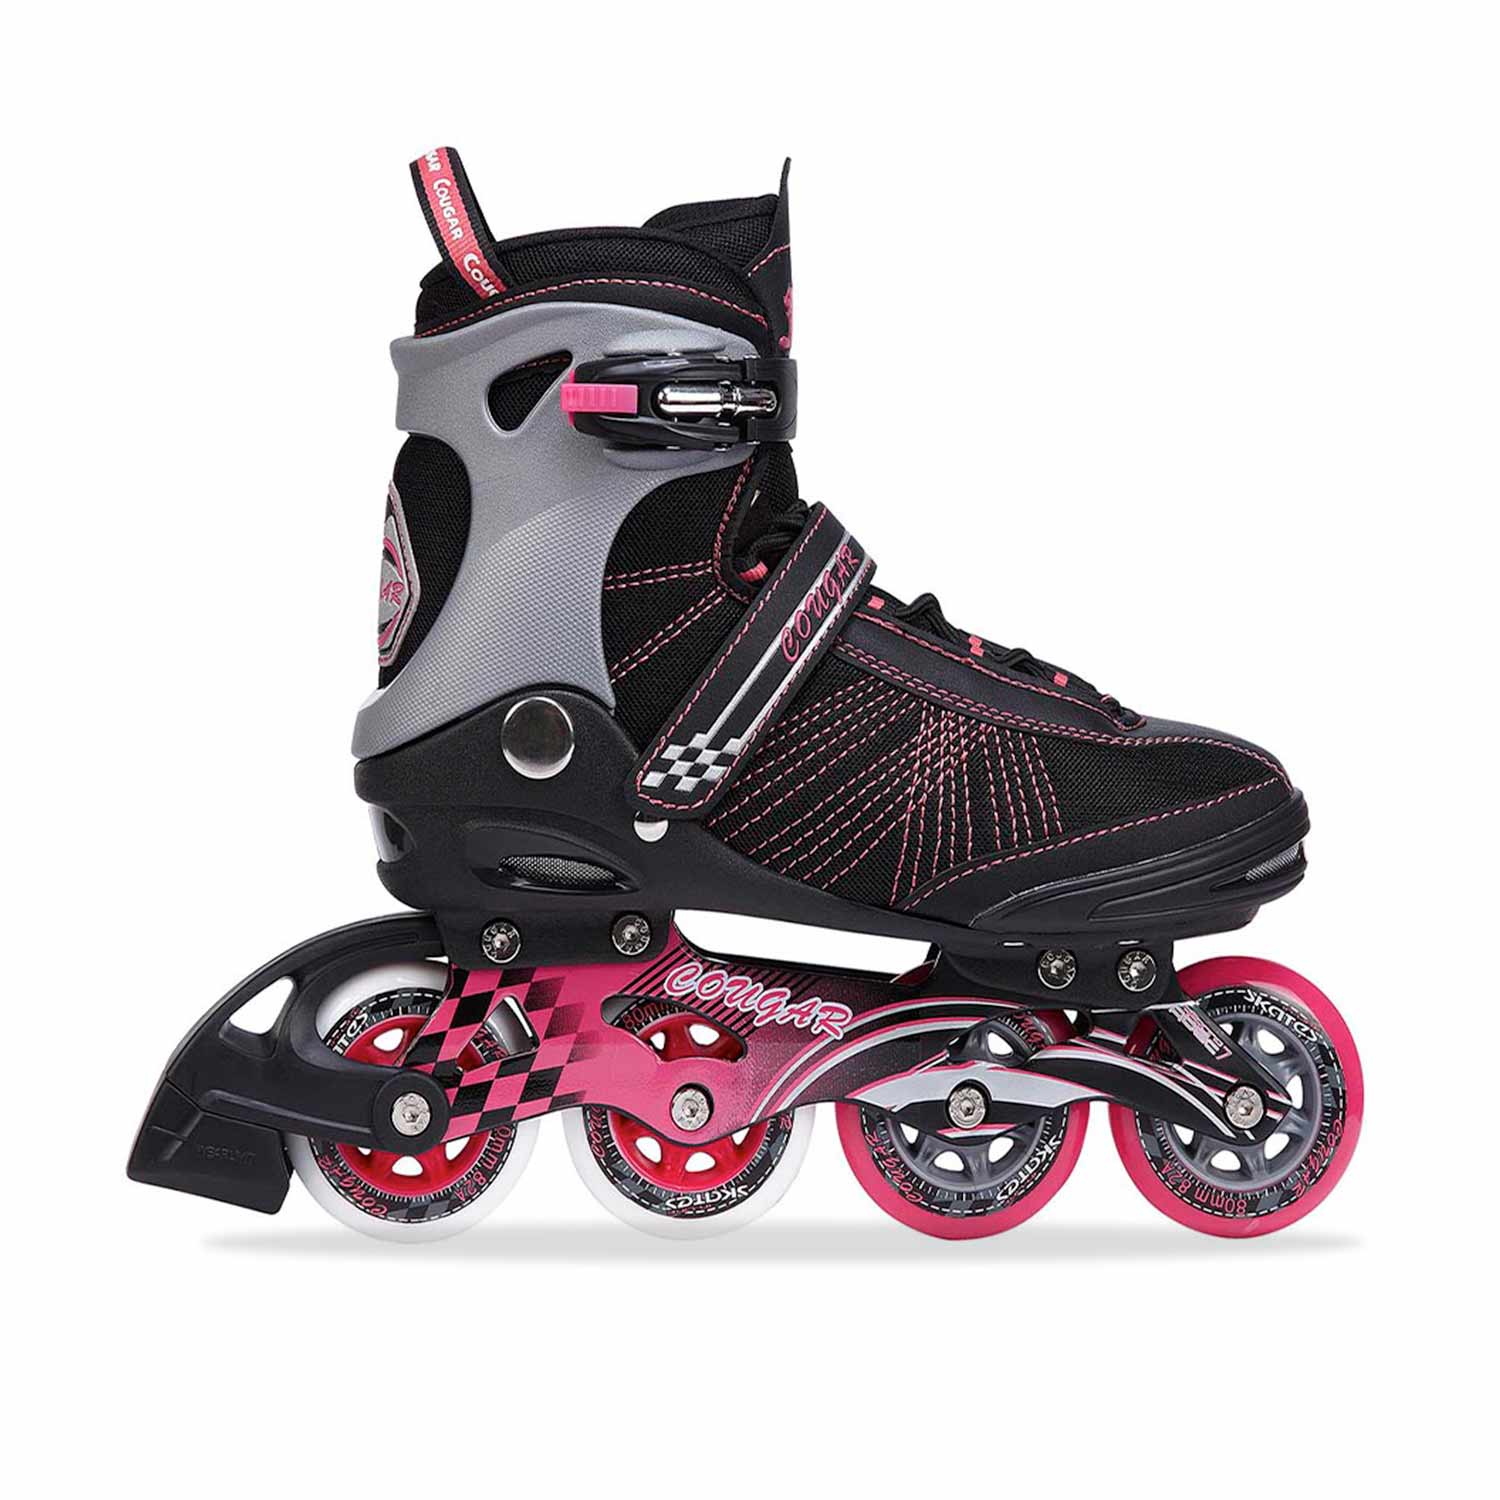 Patines-semiprofesionales-COUGAR-MZS101-Rosa-frente_500x0